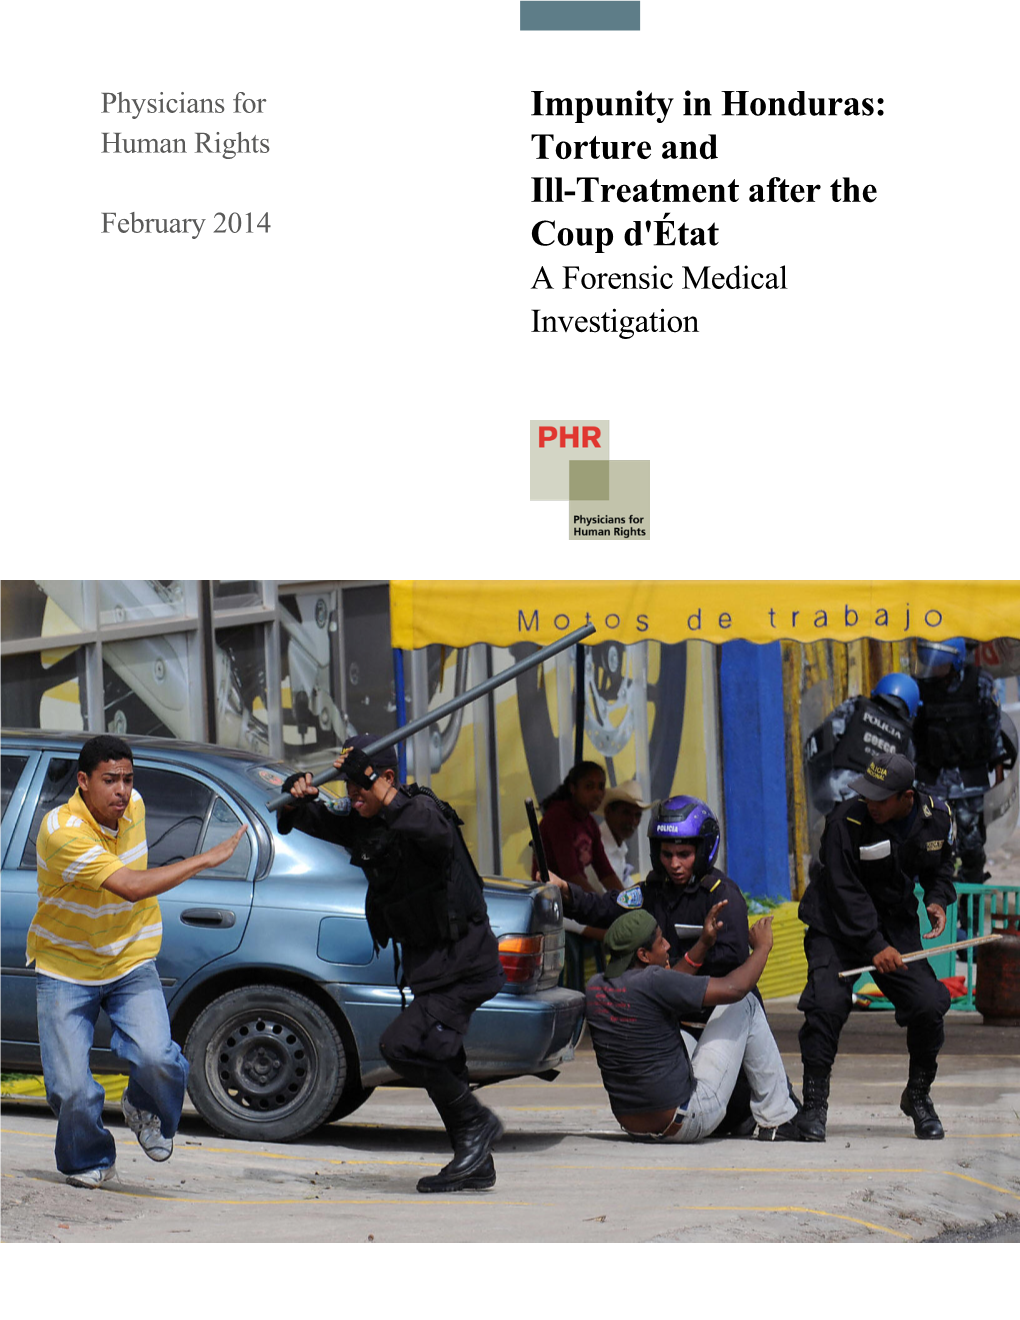 Impunity in Honduras: Torture and Ill-Treatment After the Coup D'état